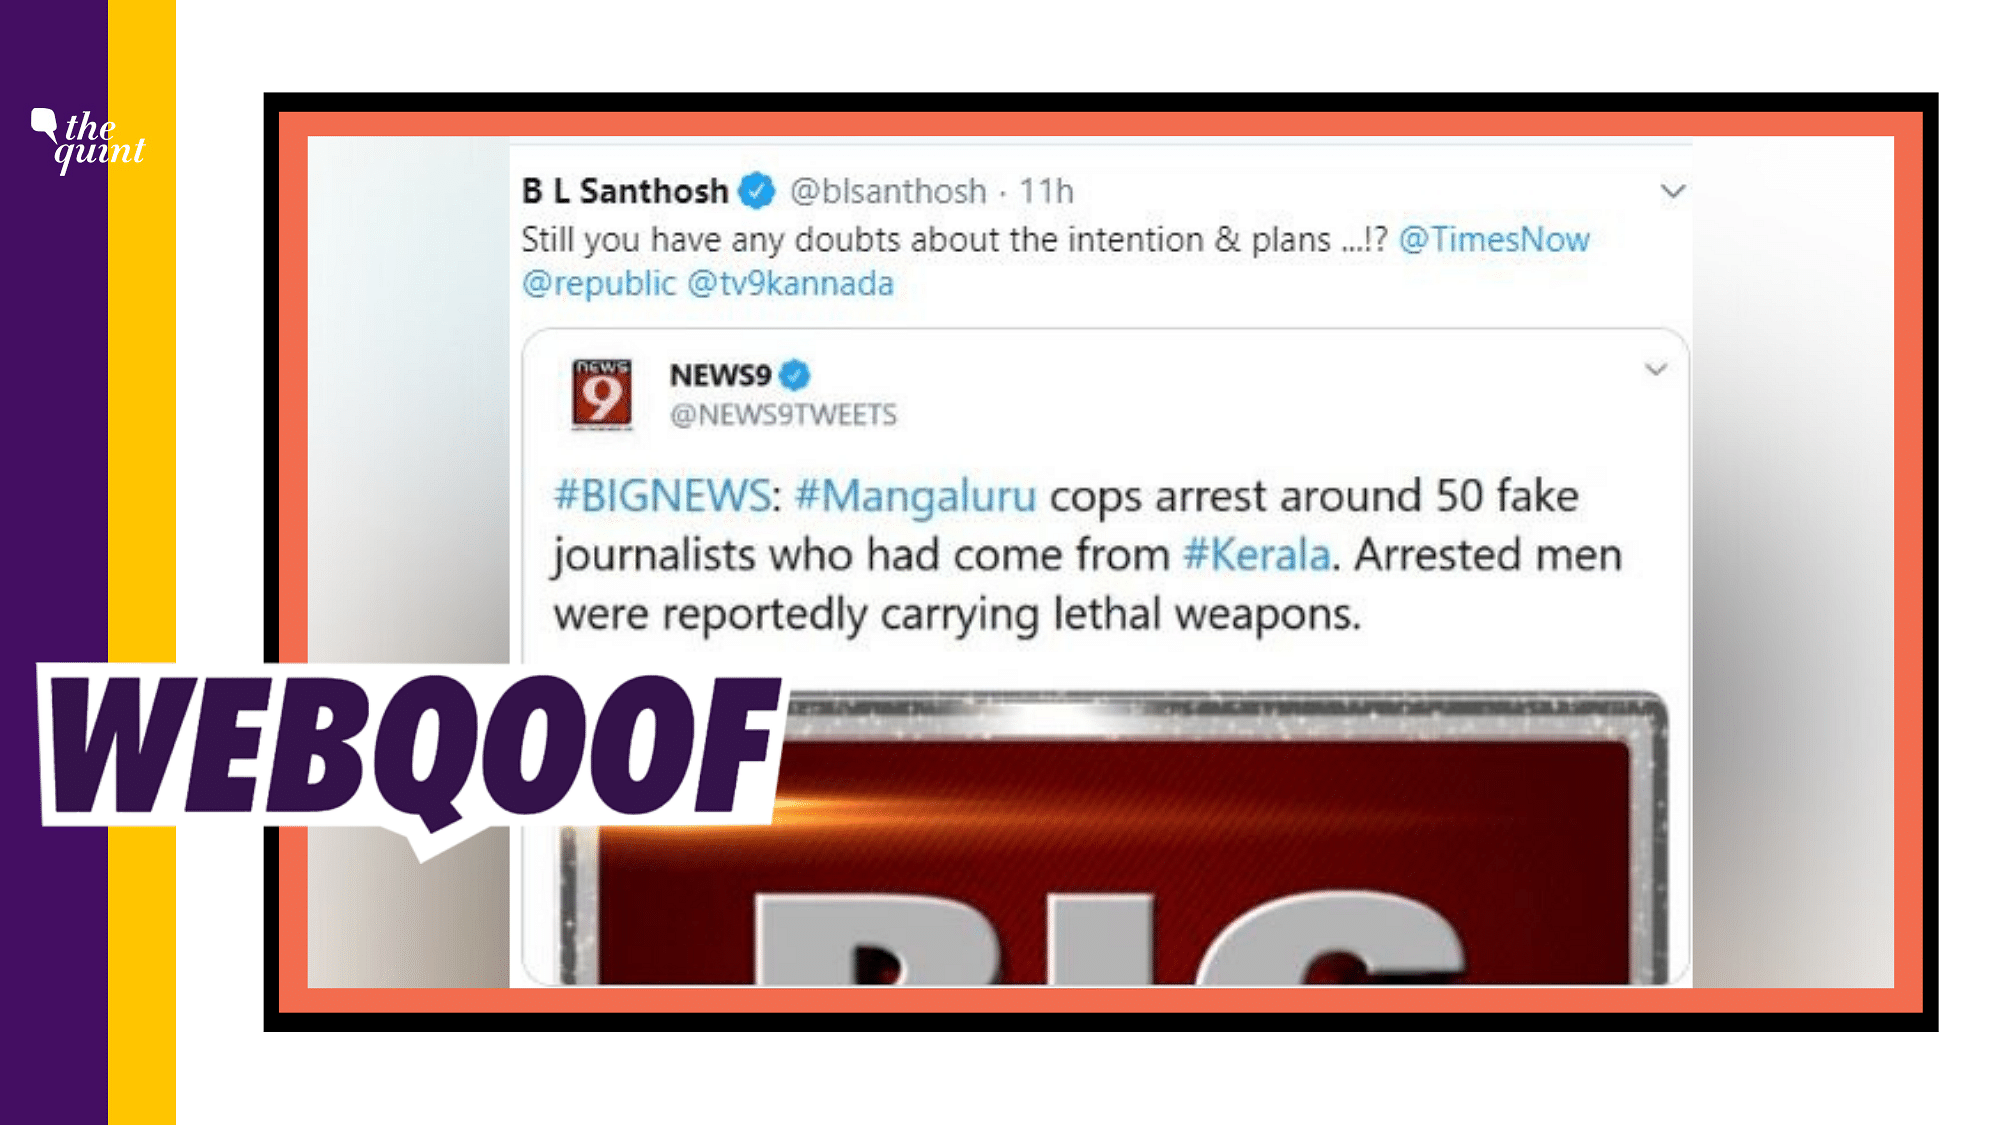 A viral claim shared by BJP functionaries on social media states that 50 journalists from Kerala in possession of lethal weapons, were arrested in Mangaluru.&nbsp;